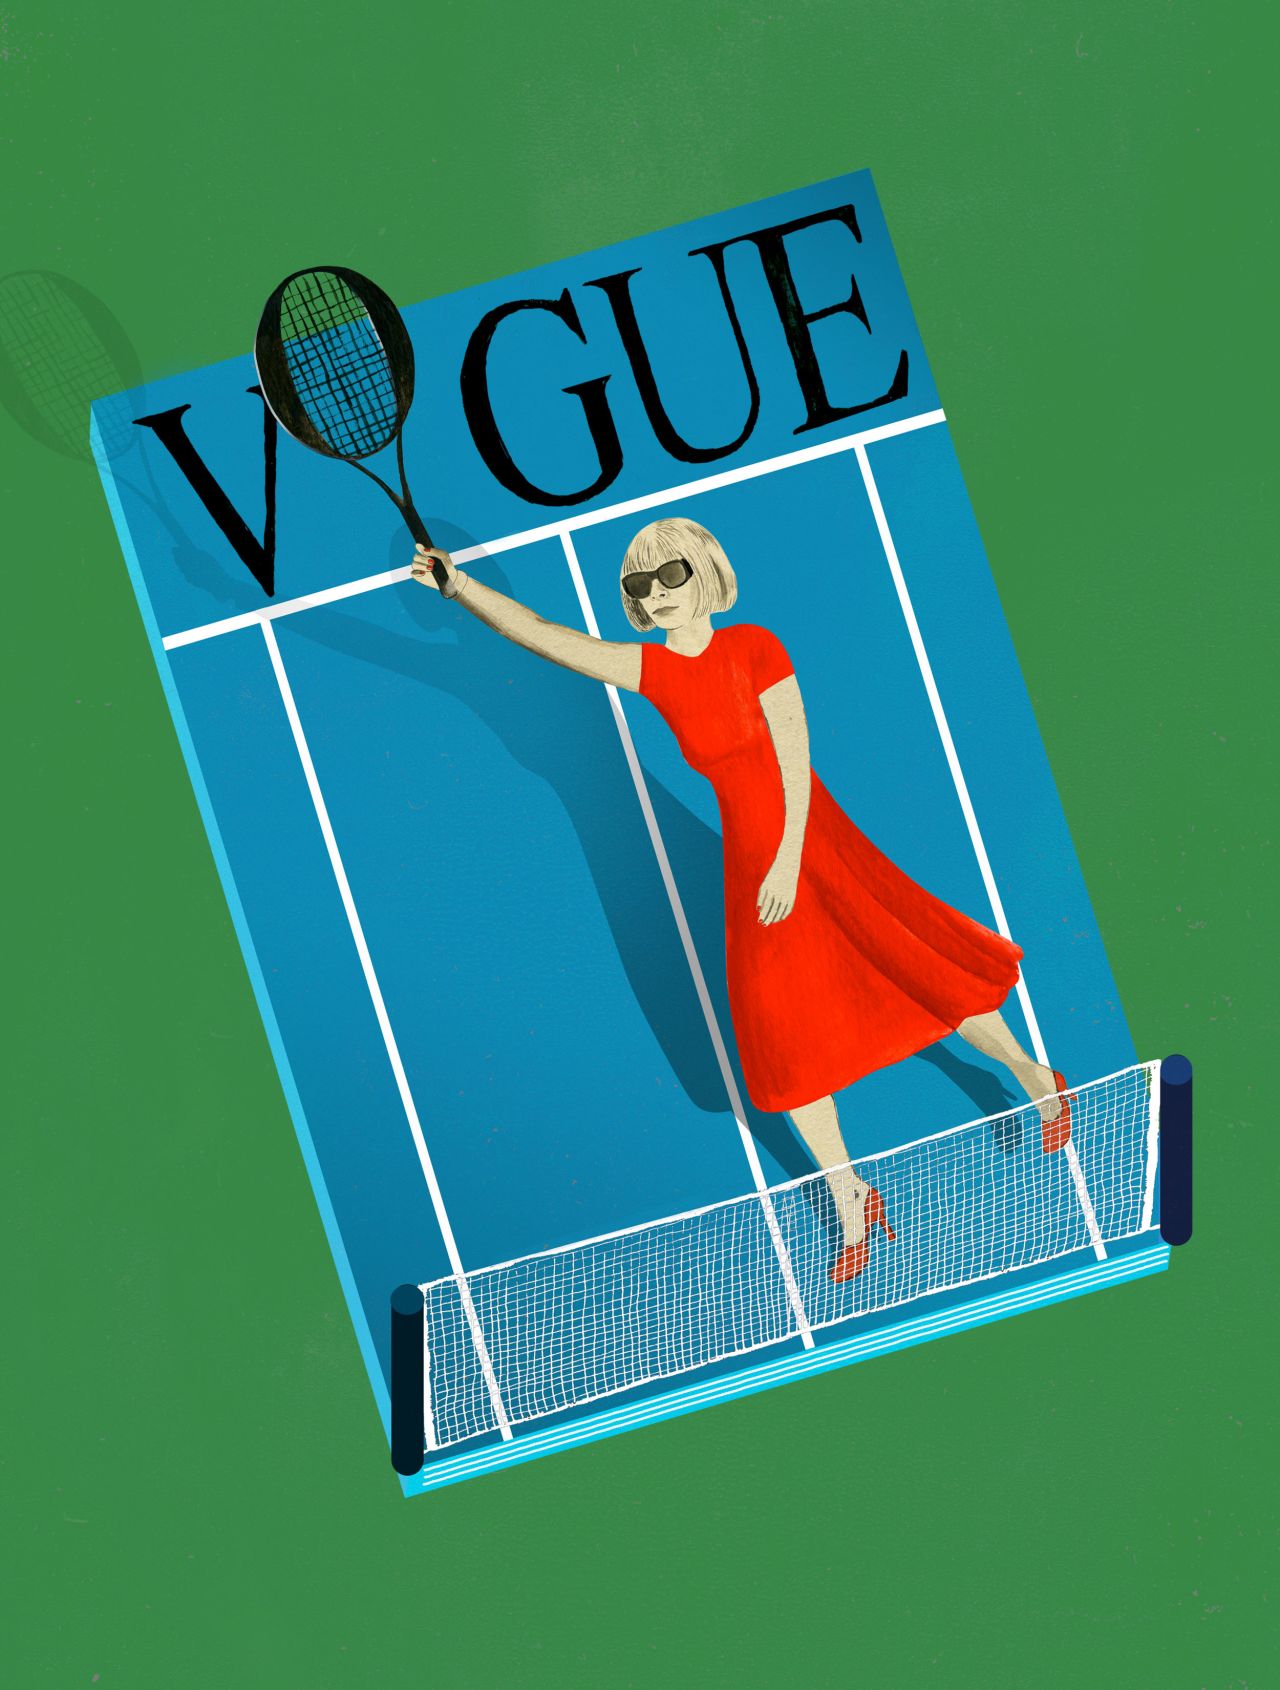 Vogue editor-in-chief Anna Wintour starts every day with an hour of tennis. 